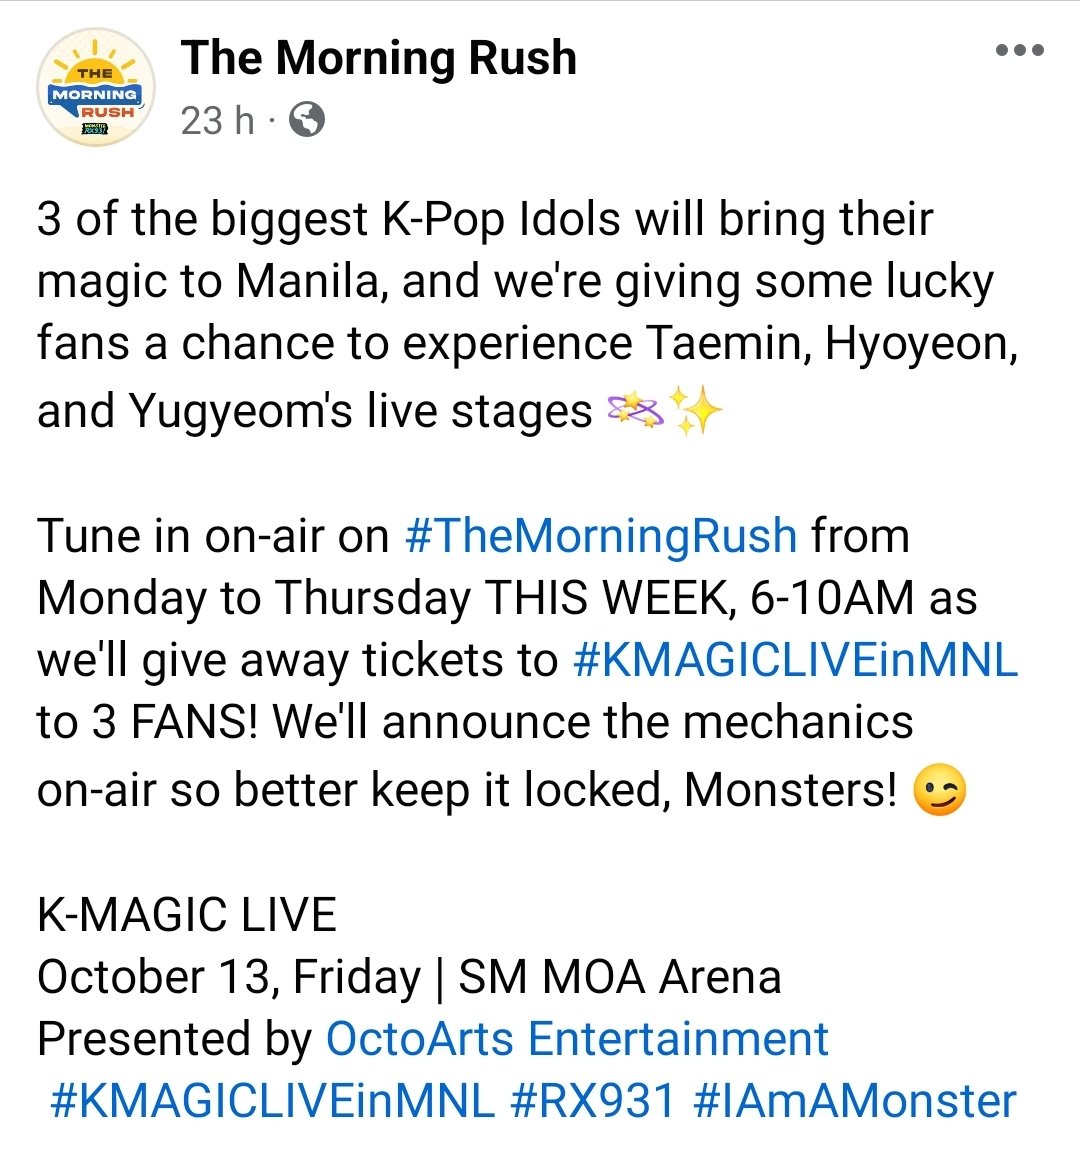 Ahgases! @RXRadio1 #TheMorningRush is holding a ticket giveaway this week!

Tune in from today till Thursday THIS WEEK, 6-10AM for the mechanics ✨️✨️✨️ 

#KMAGICLIVEinMNL_YUGYEOM 
#KMAGICLIVEinMNL #IAmAMonster